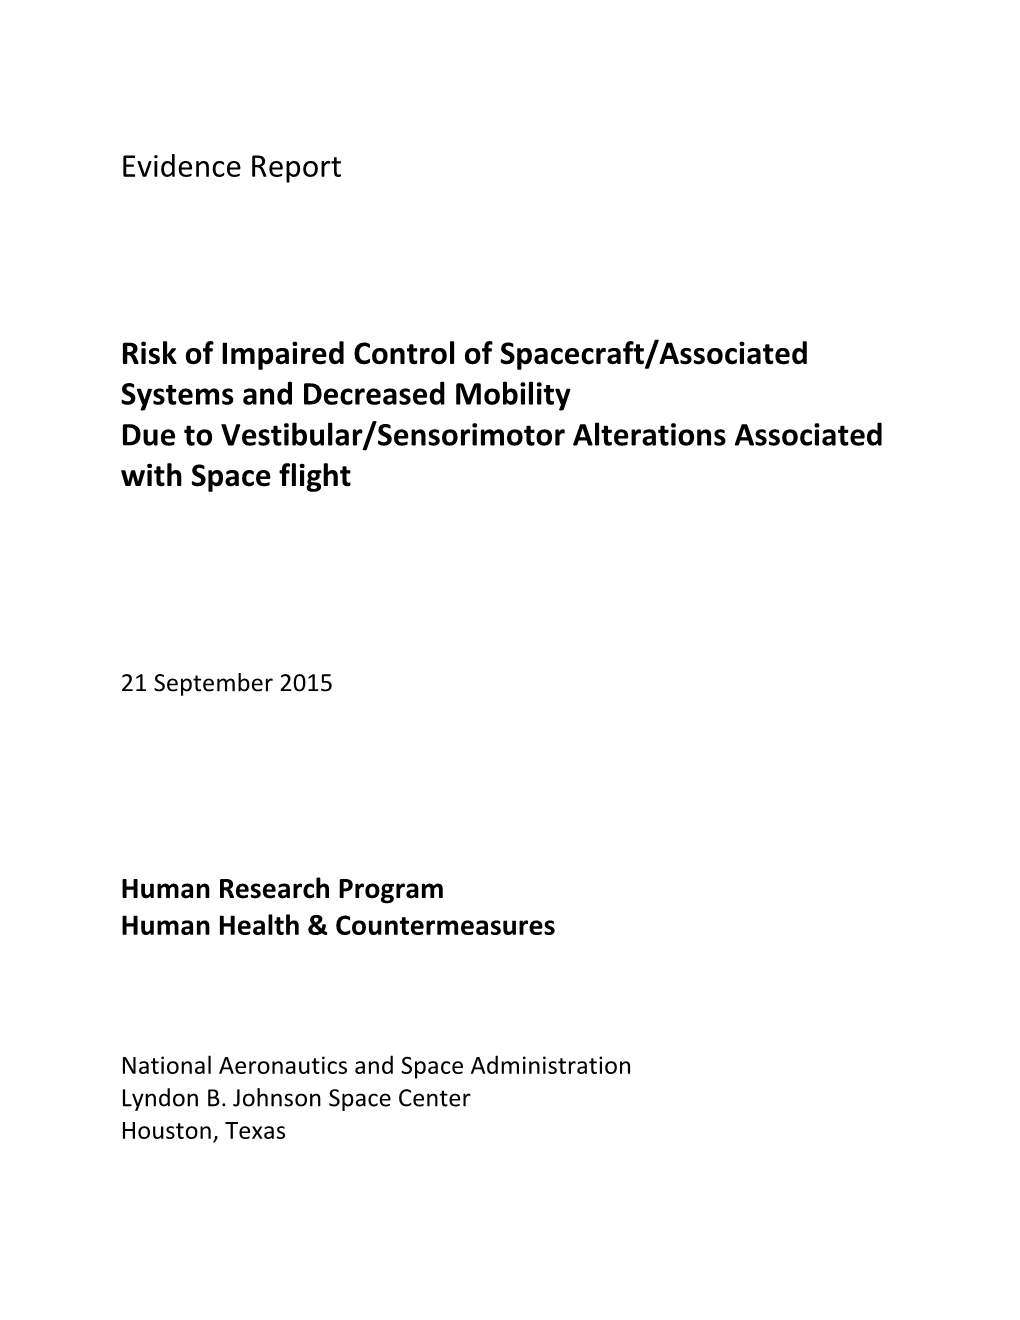 Evidence Report Risk of Impaired Control of Spacecraft/Associated